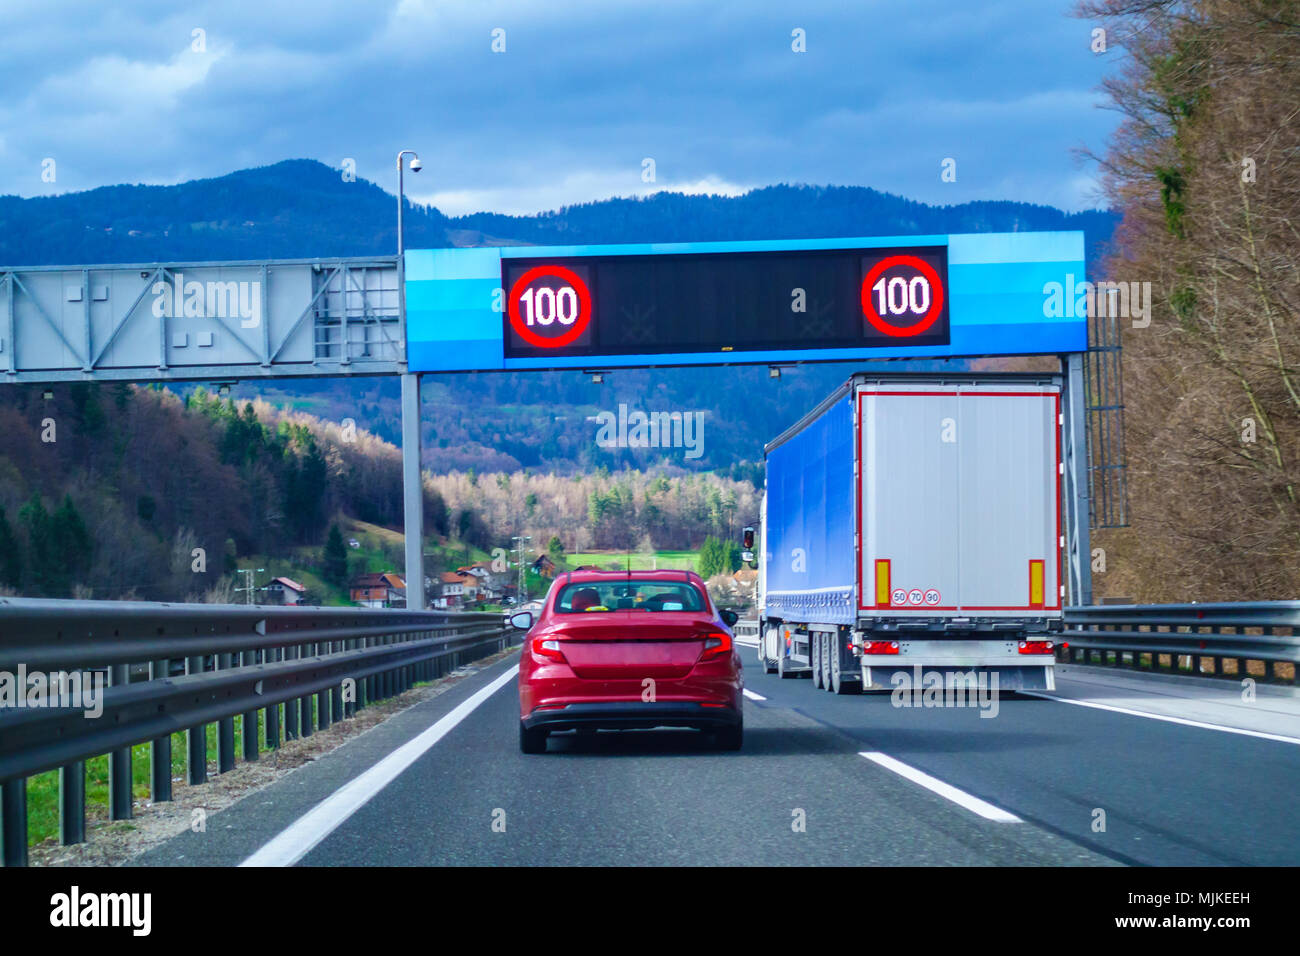 Modern LED traffic signs on highway, red car, truck on road Stock Photo